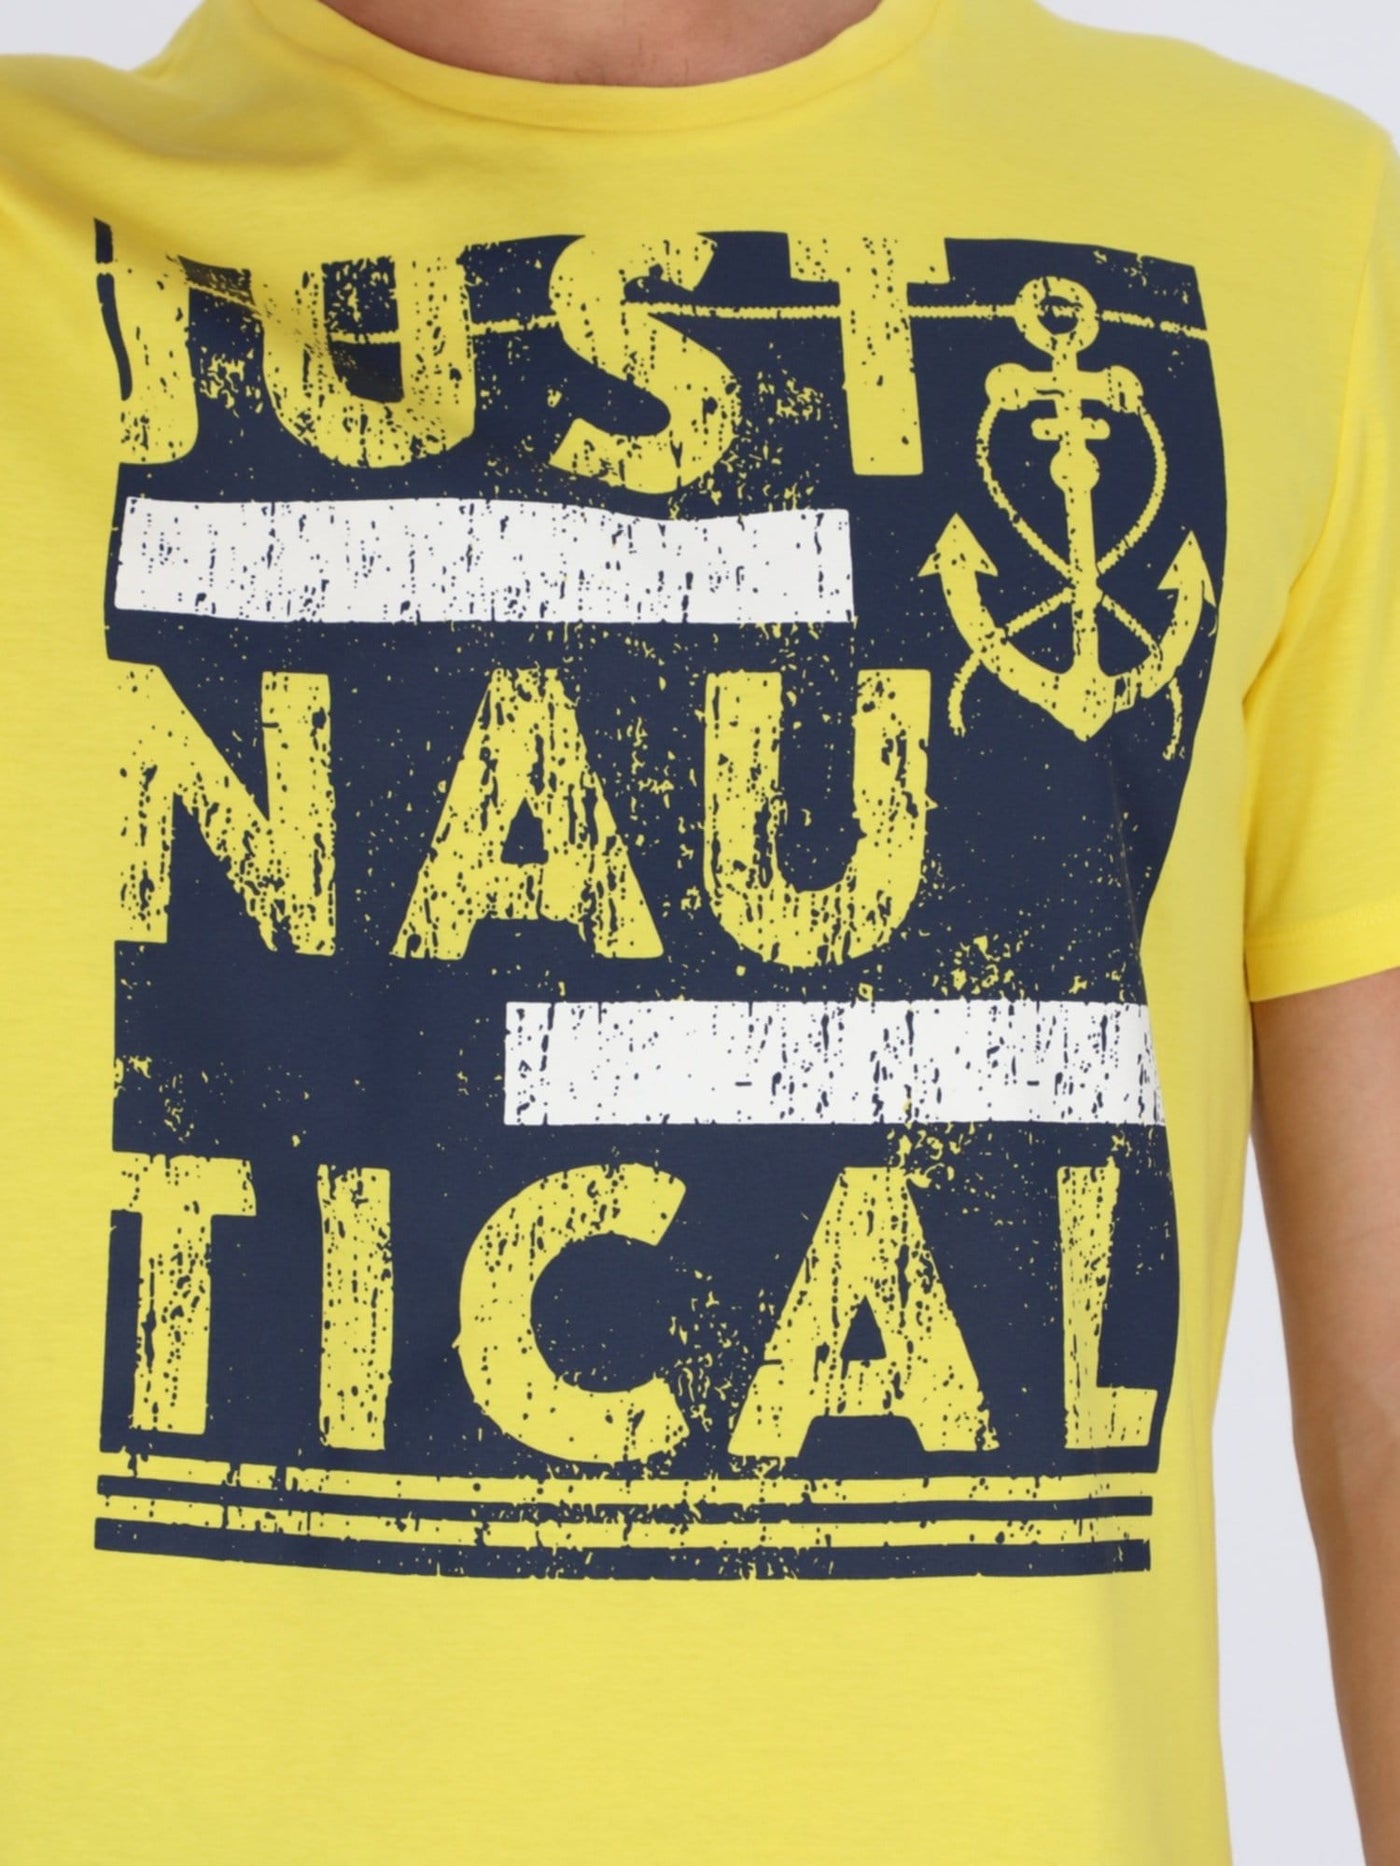 OR T-Shirts Just Nautical Front Text Print Short Sleeve T-Shirt